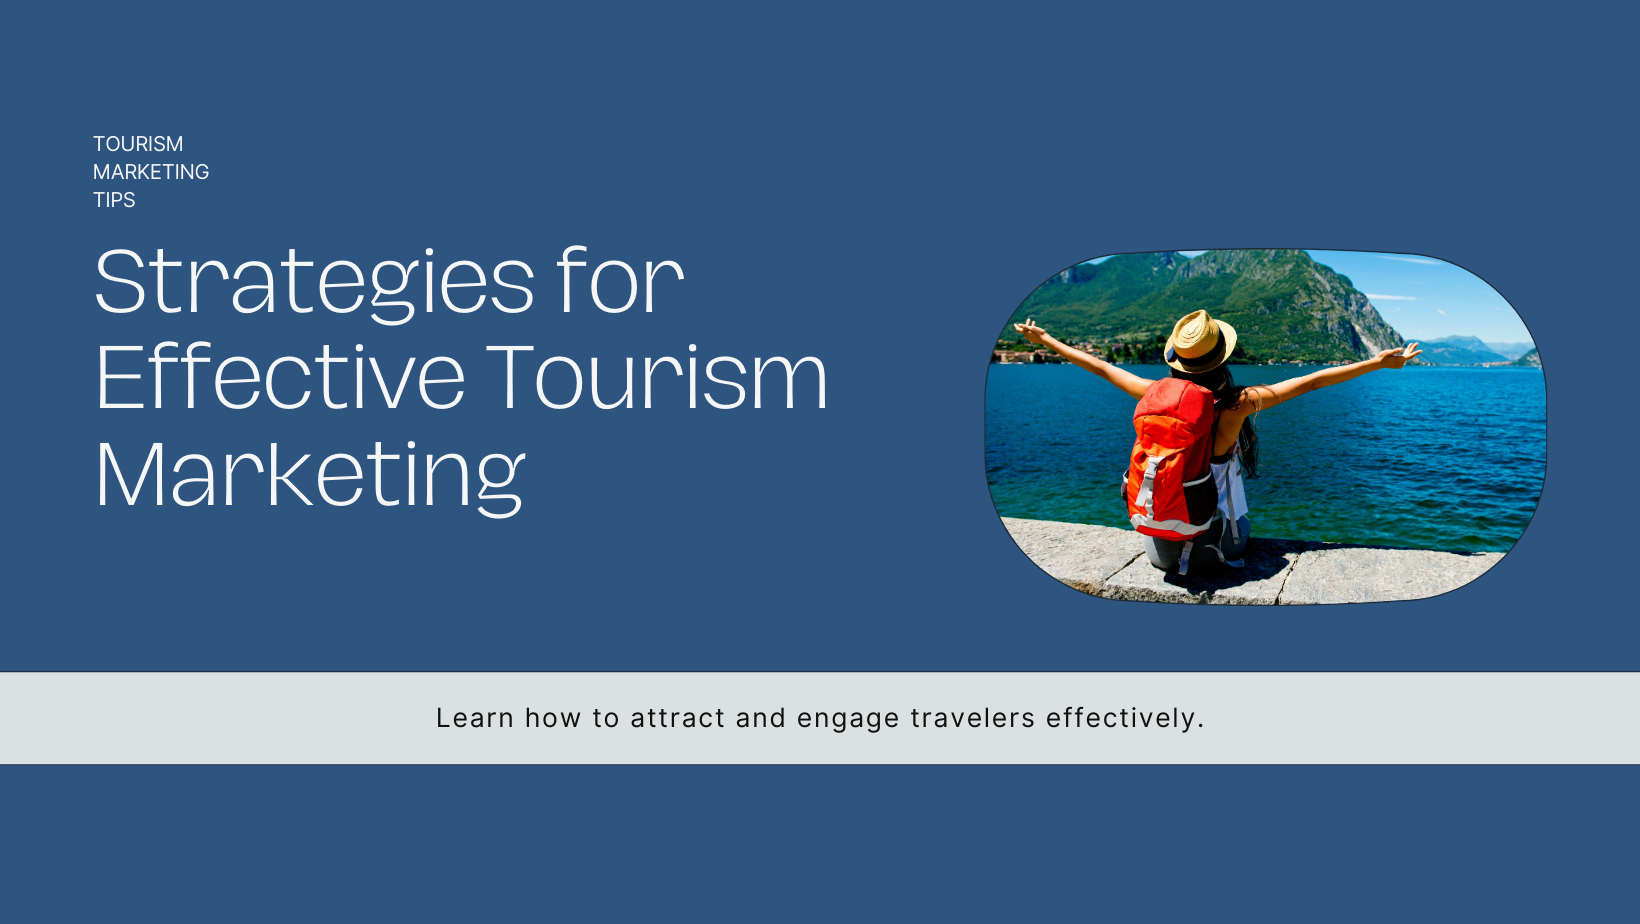 Marketing in Tourism